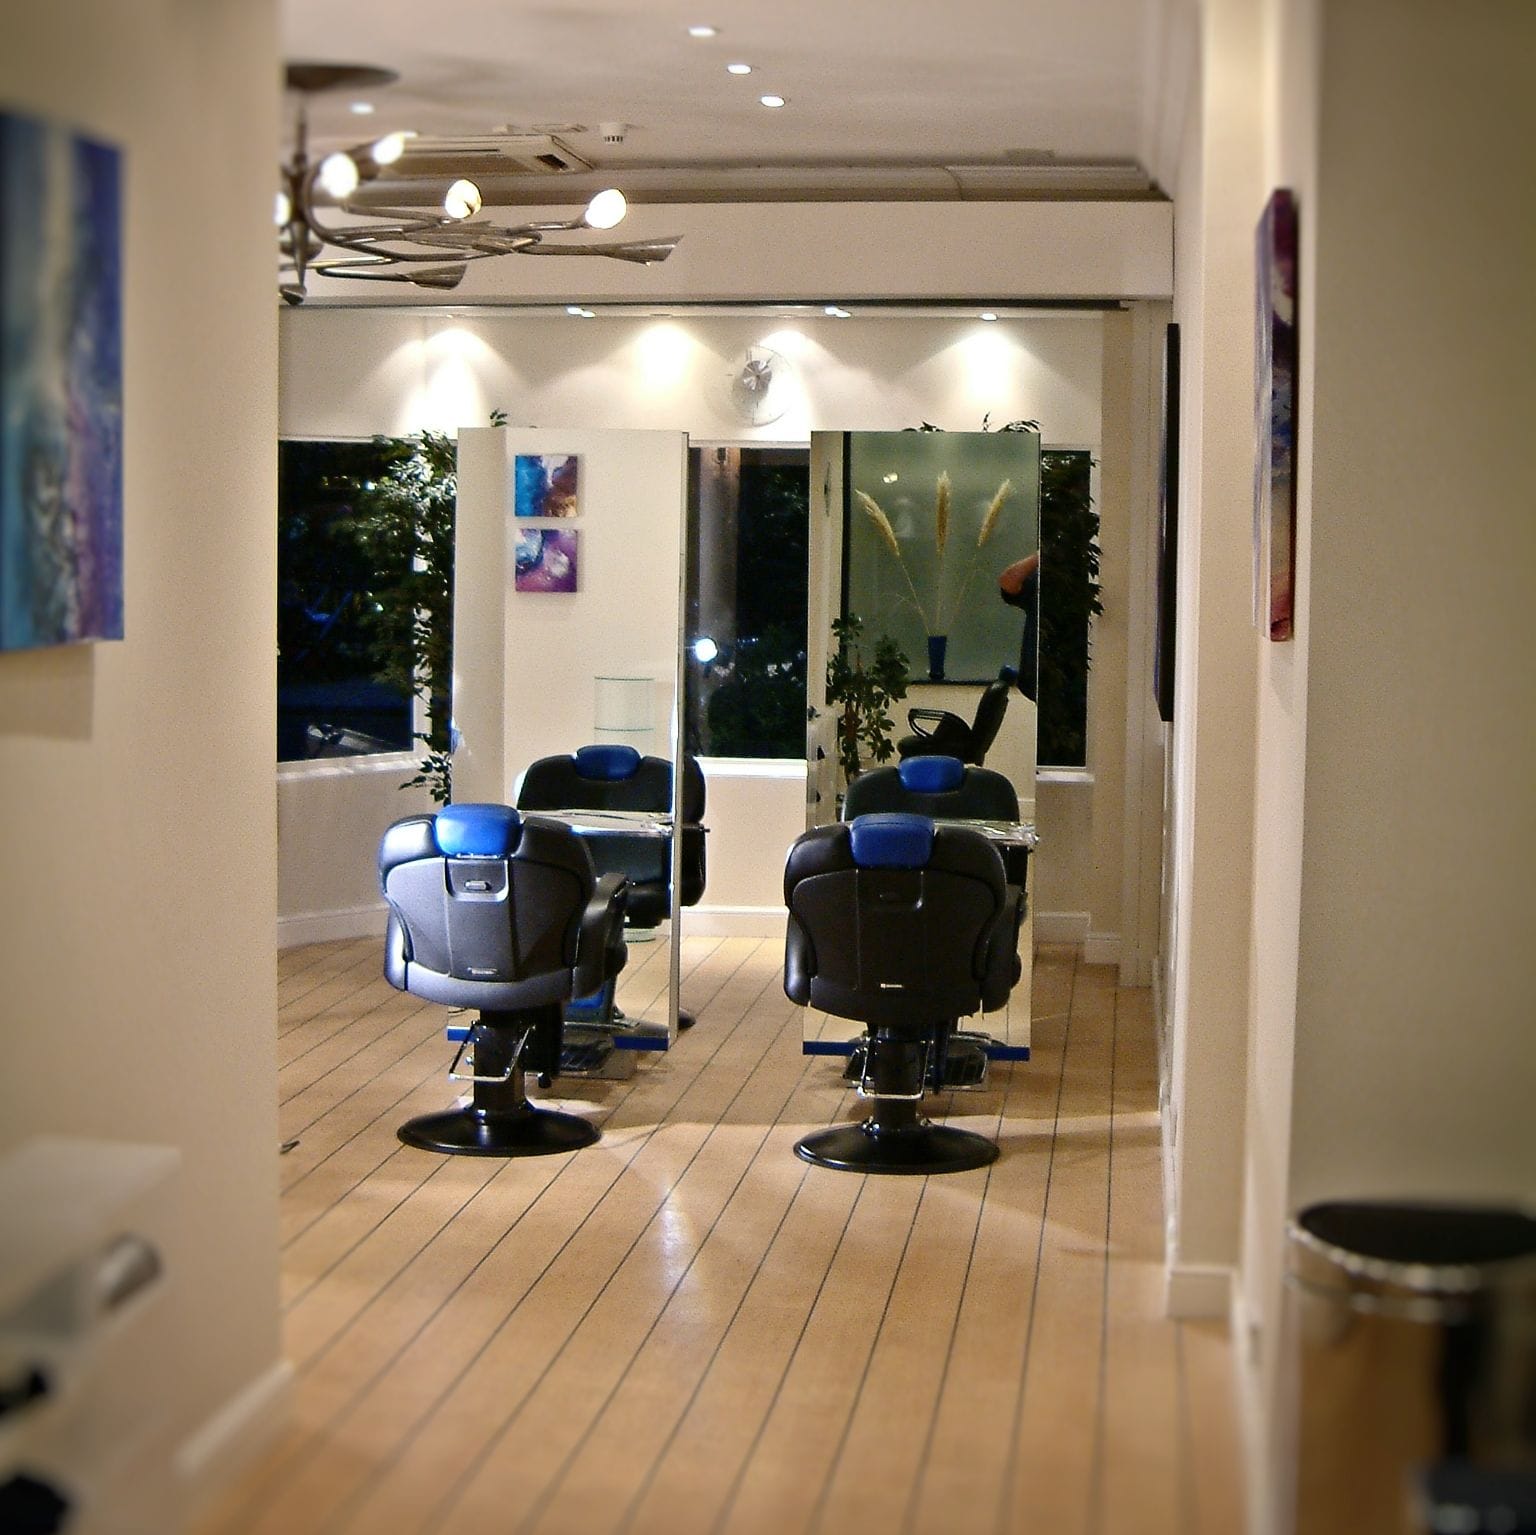 Electronically adjustable Japanese styling chairs at Mark Glenn's Mayfair location, 2005